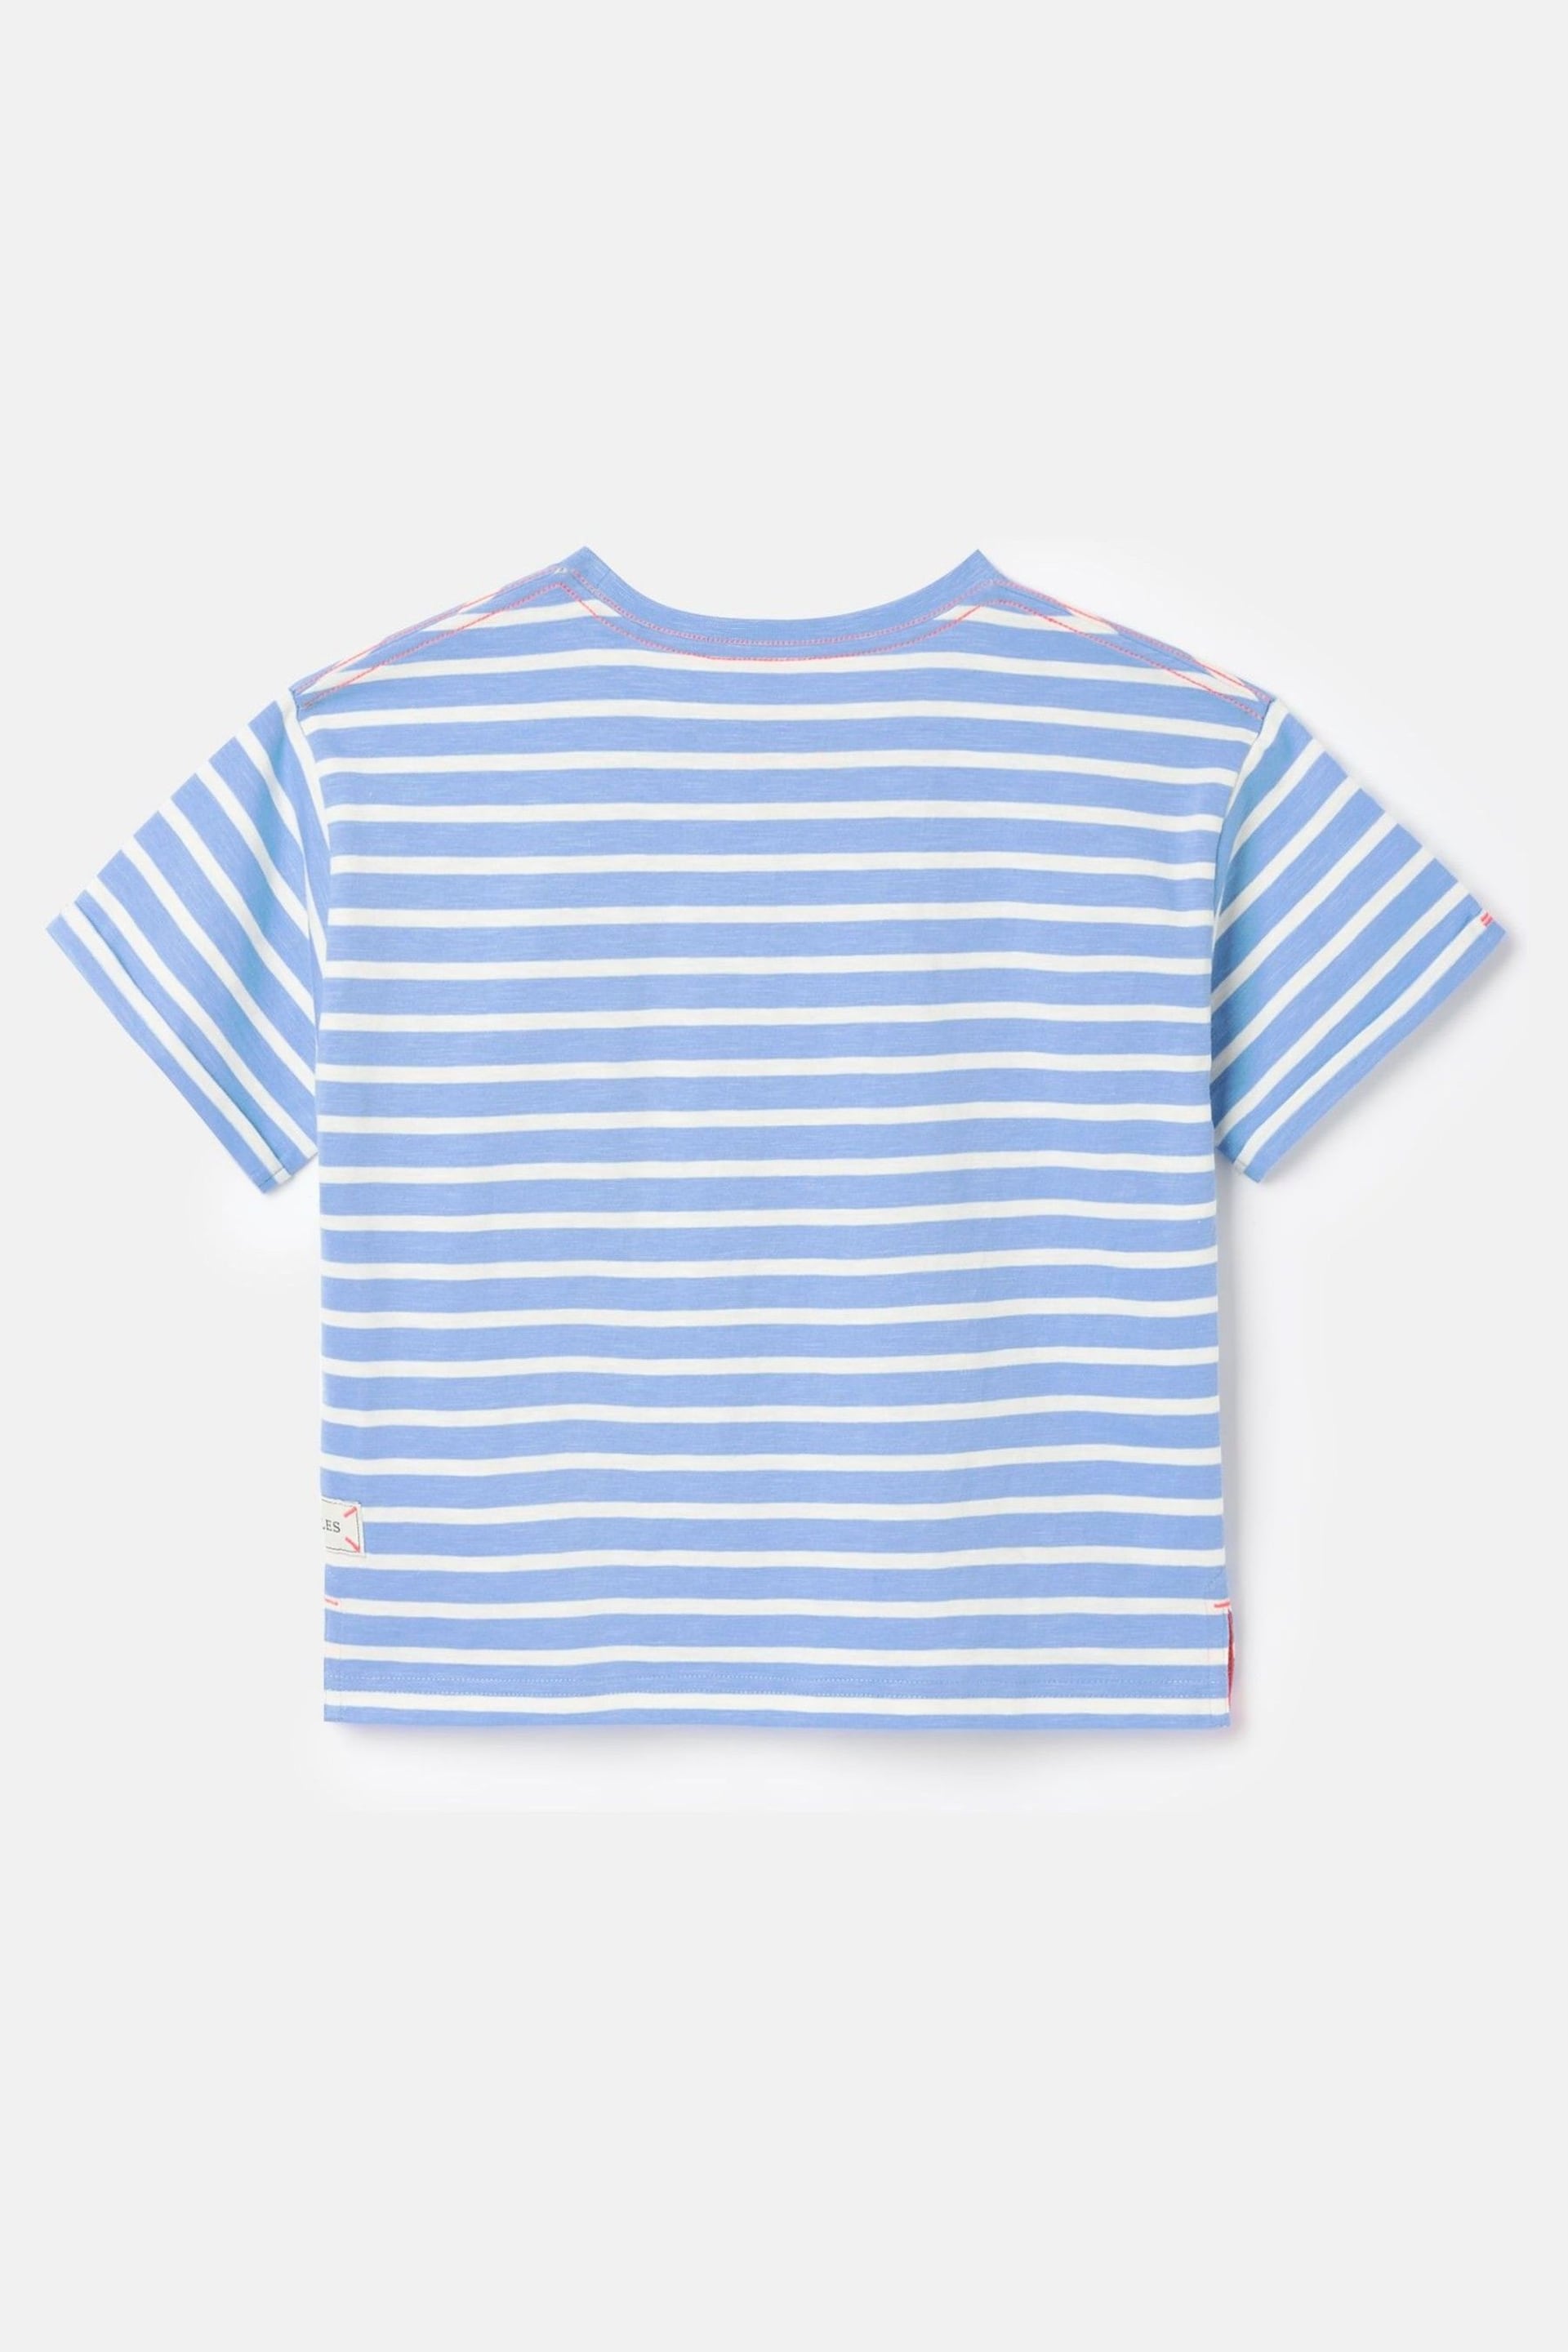 Joules Fun Days Blue Short Sleeve Graphic T-shirt - Image 4 of 5